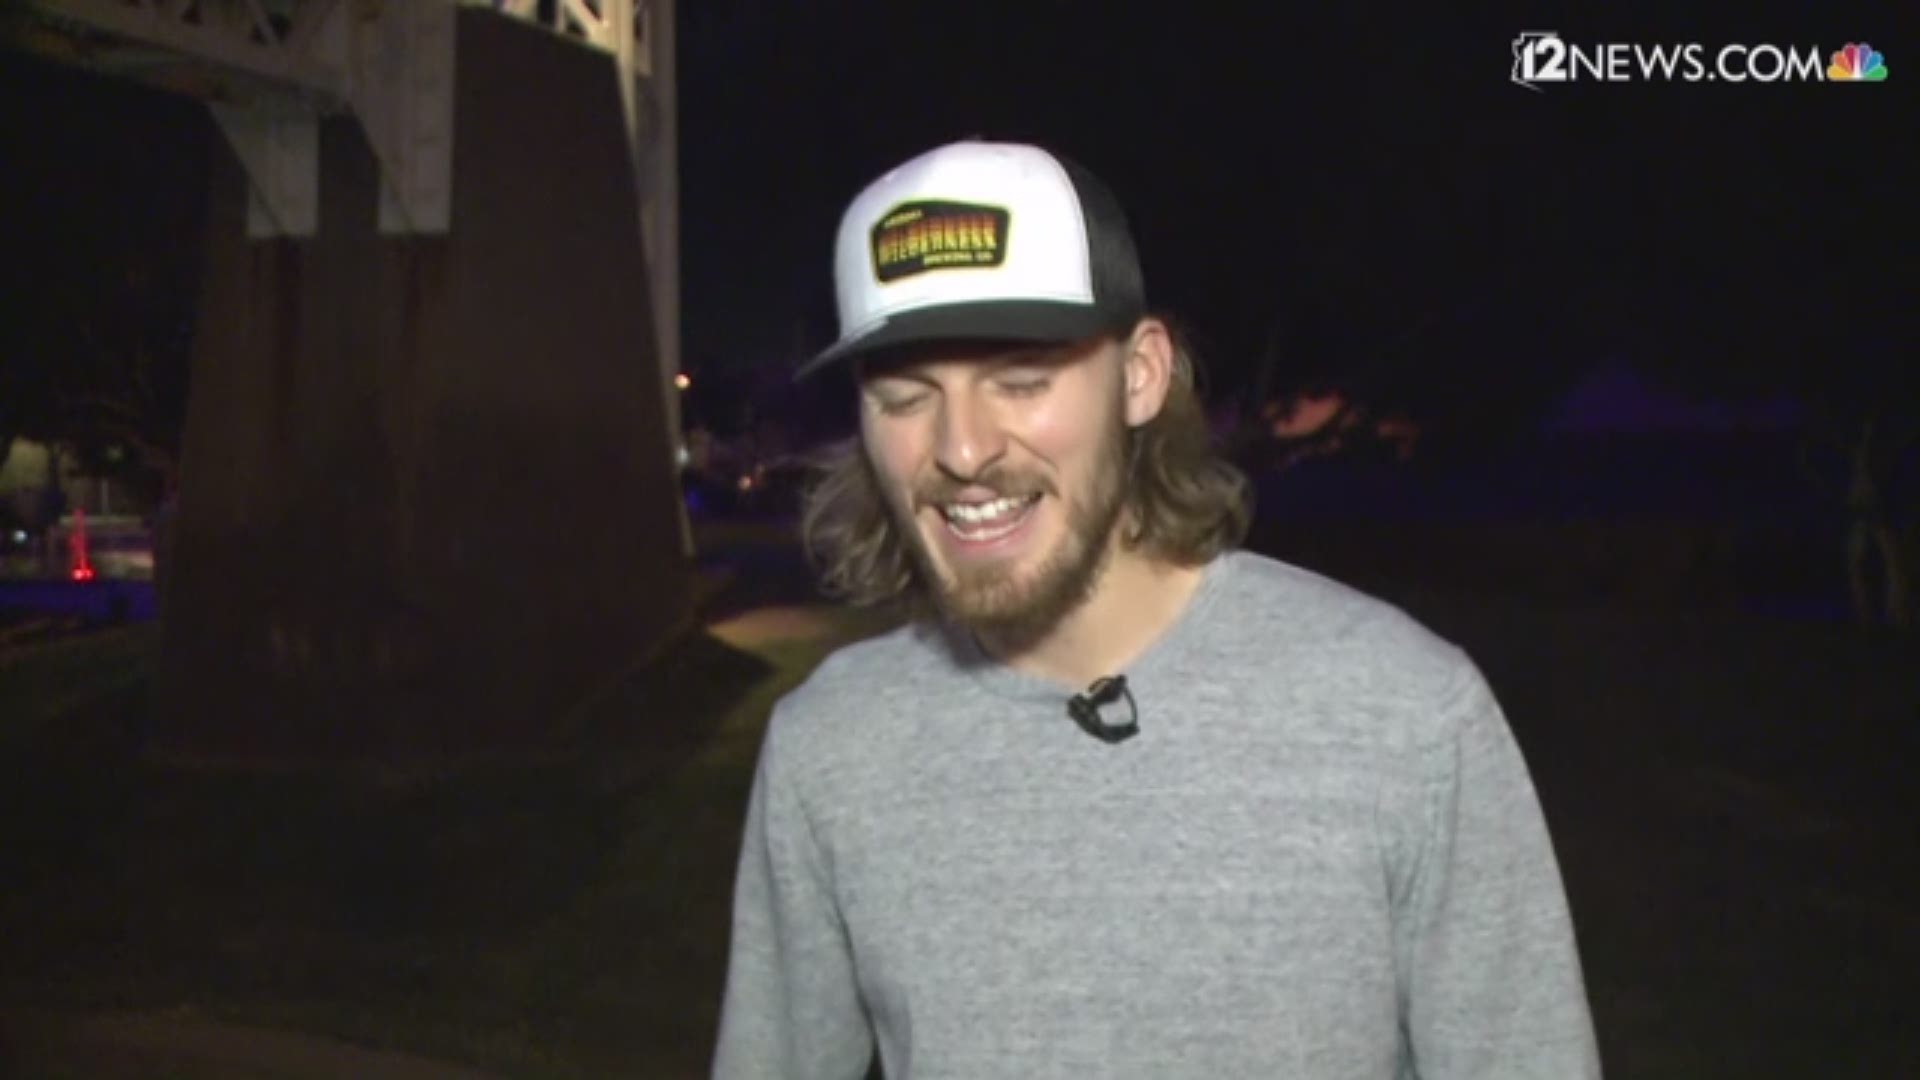 Daniel Graham, aka "Mill Avenue Jesus," speaks to 12 News about his now-viral Halloween moment.